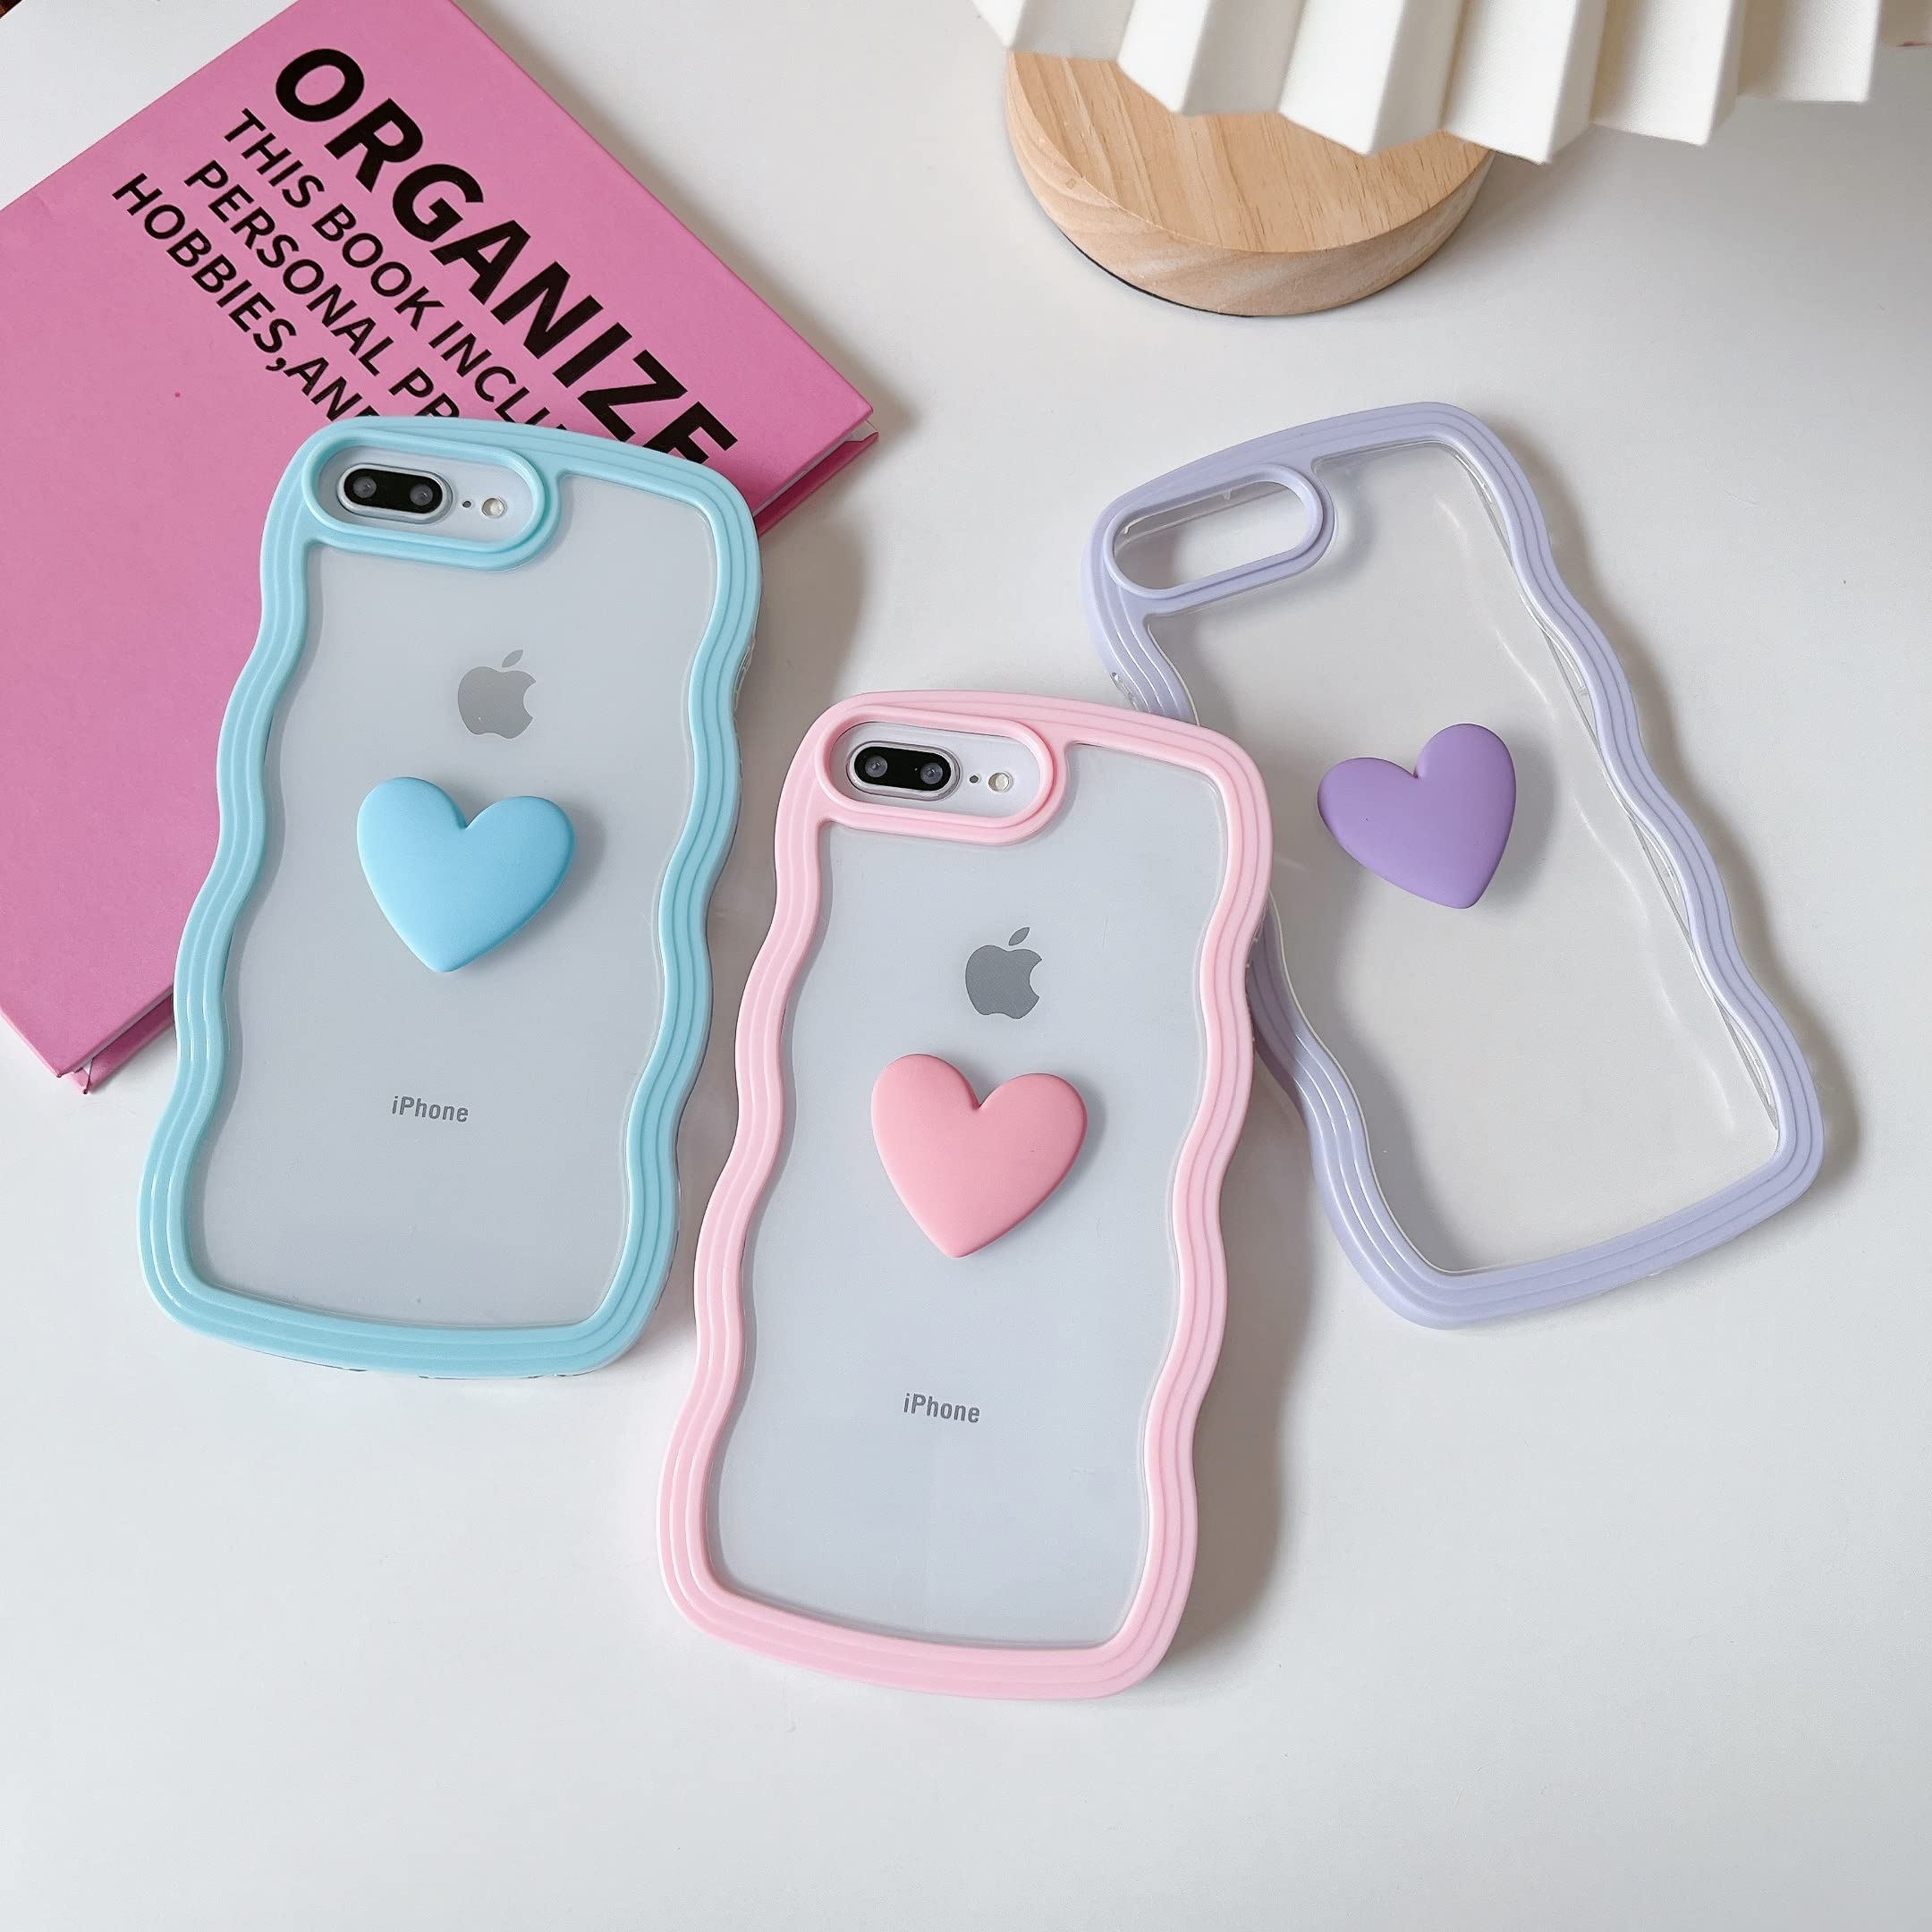 Qokey for iPhone 8 Plus Case,iPhone 7 Plus Case,Cute Clear 3D Love Heart Wavy Frame Full Protection for iPhone 7 Plus & 8 Plus 5.5